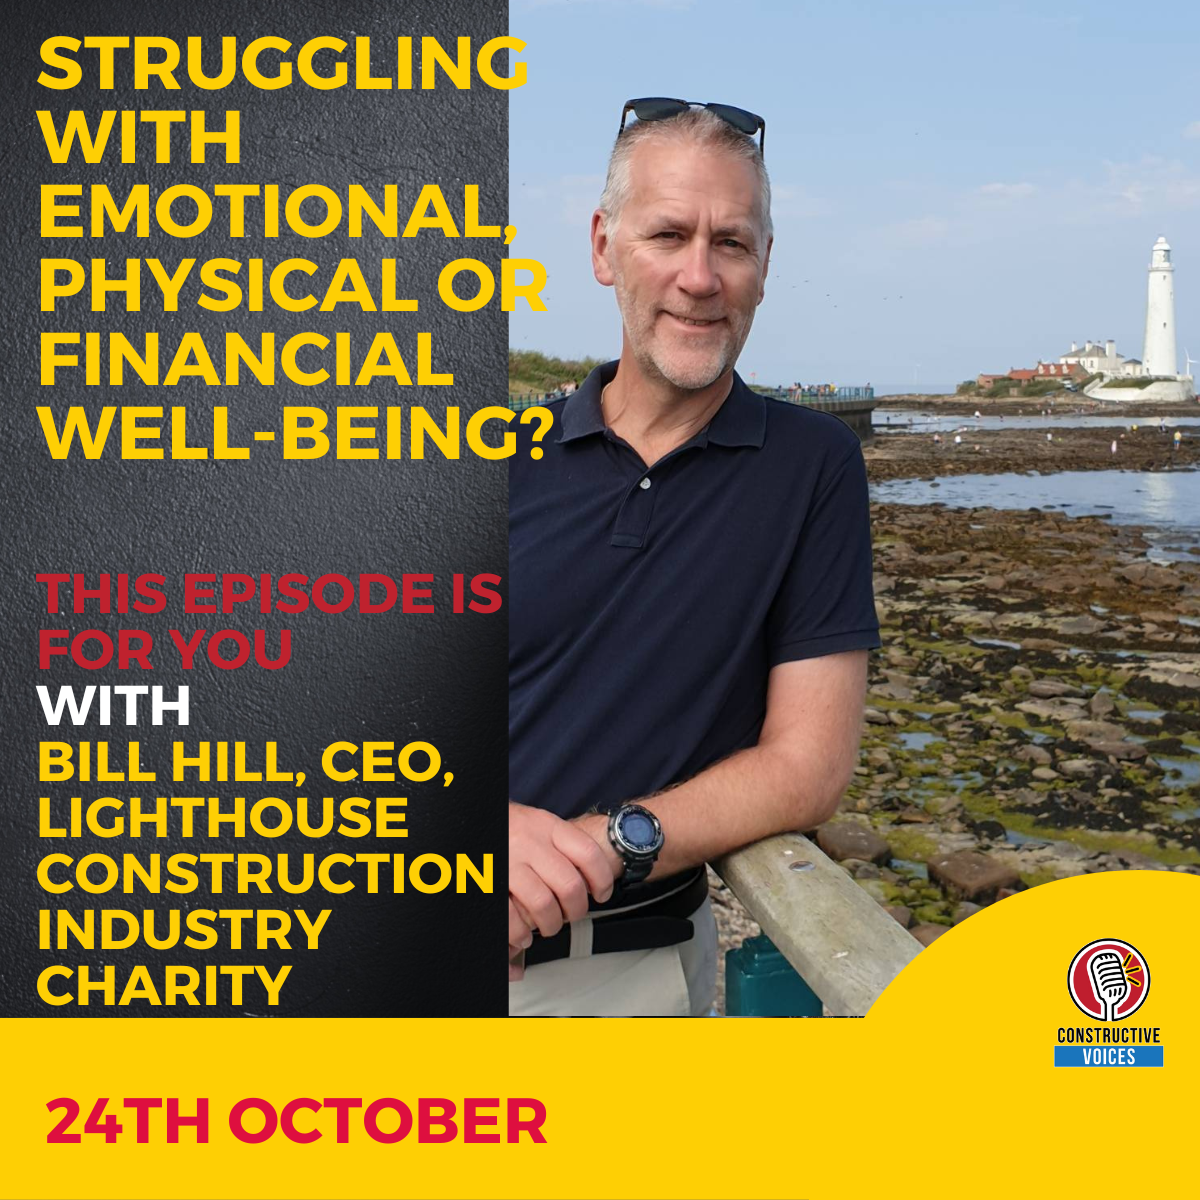  Struggling with Emotional, Physical or Financial Wellbeing? This Episode is for You